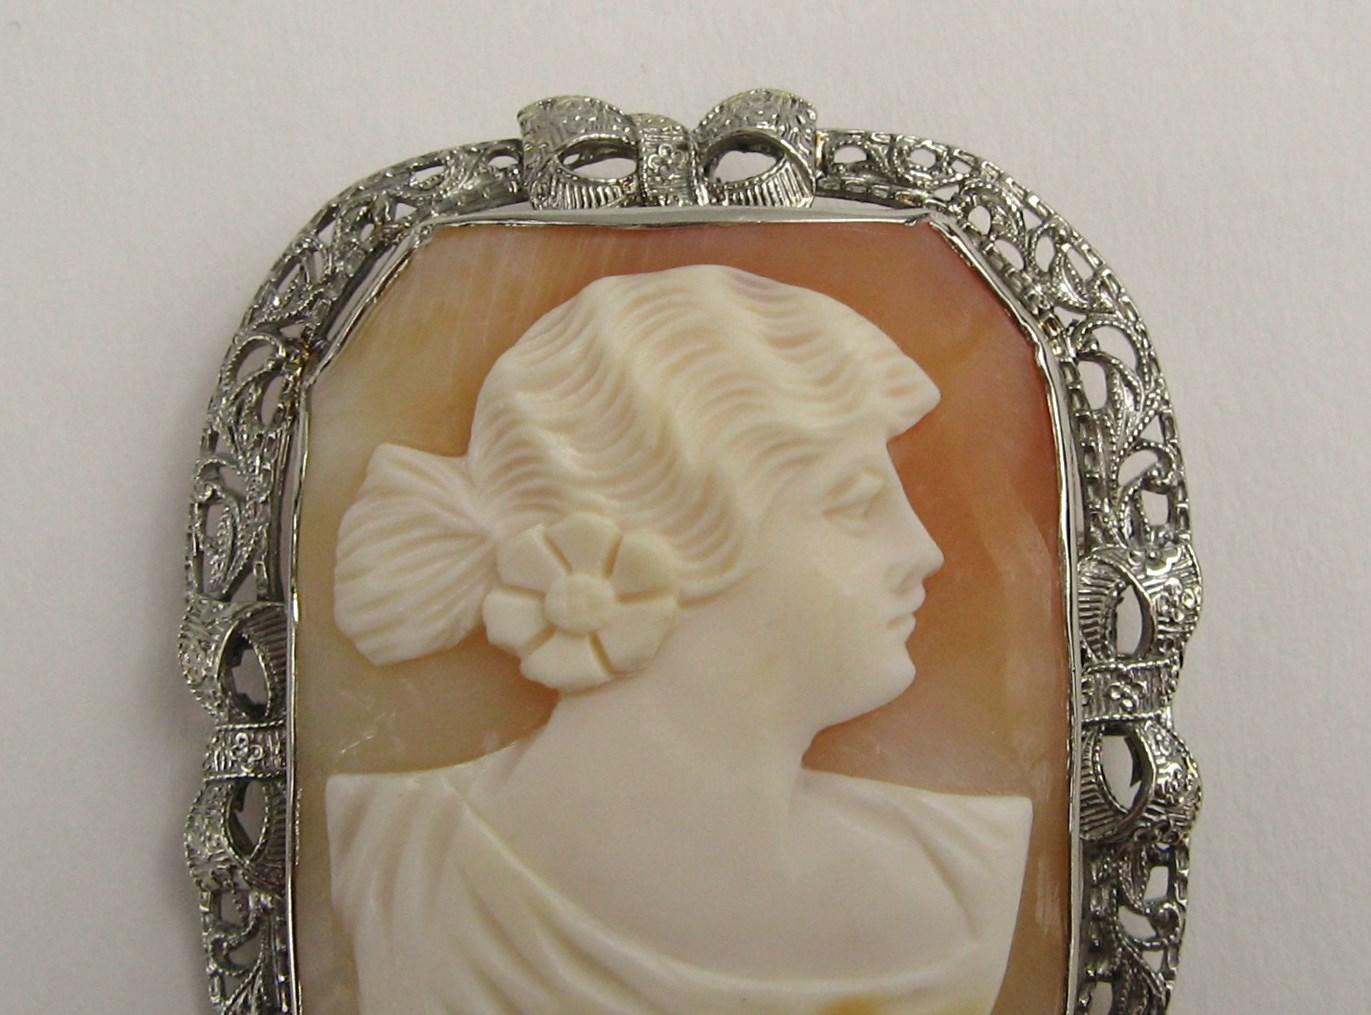 Cameo set in 14K White gold, simply stunning! It has a stunning openwork white gold frame with bow details on all sides. Both a brooch and pendant.  Measuring 1.82 inches top to bottom 1.48 wide.  Hallmarked 14k on the clasp.  Fold down pendant hoop